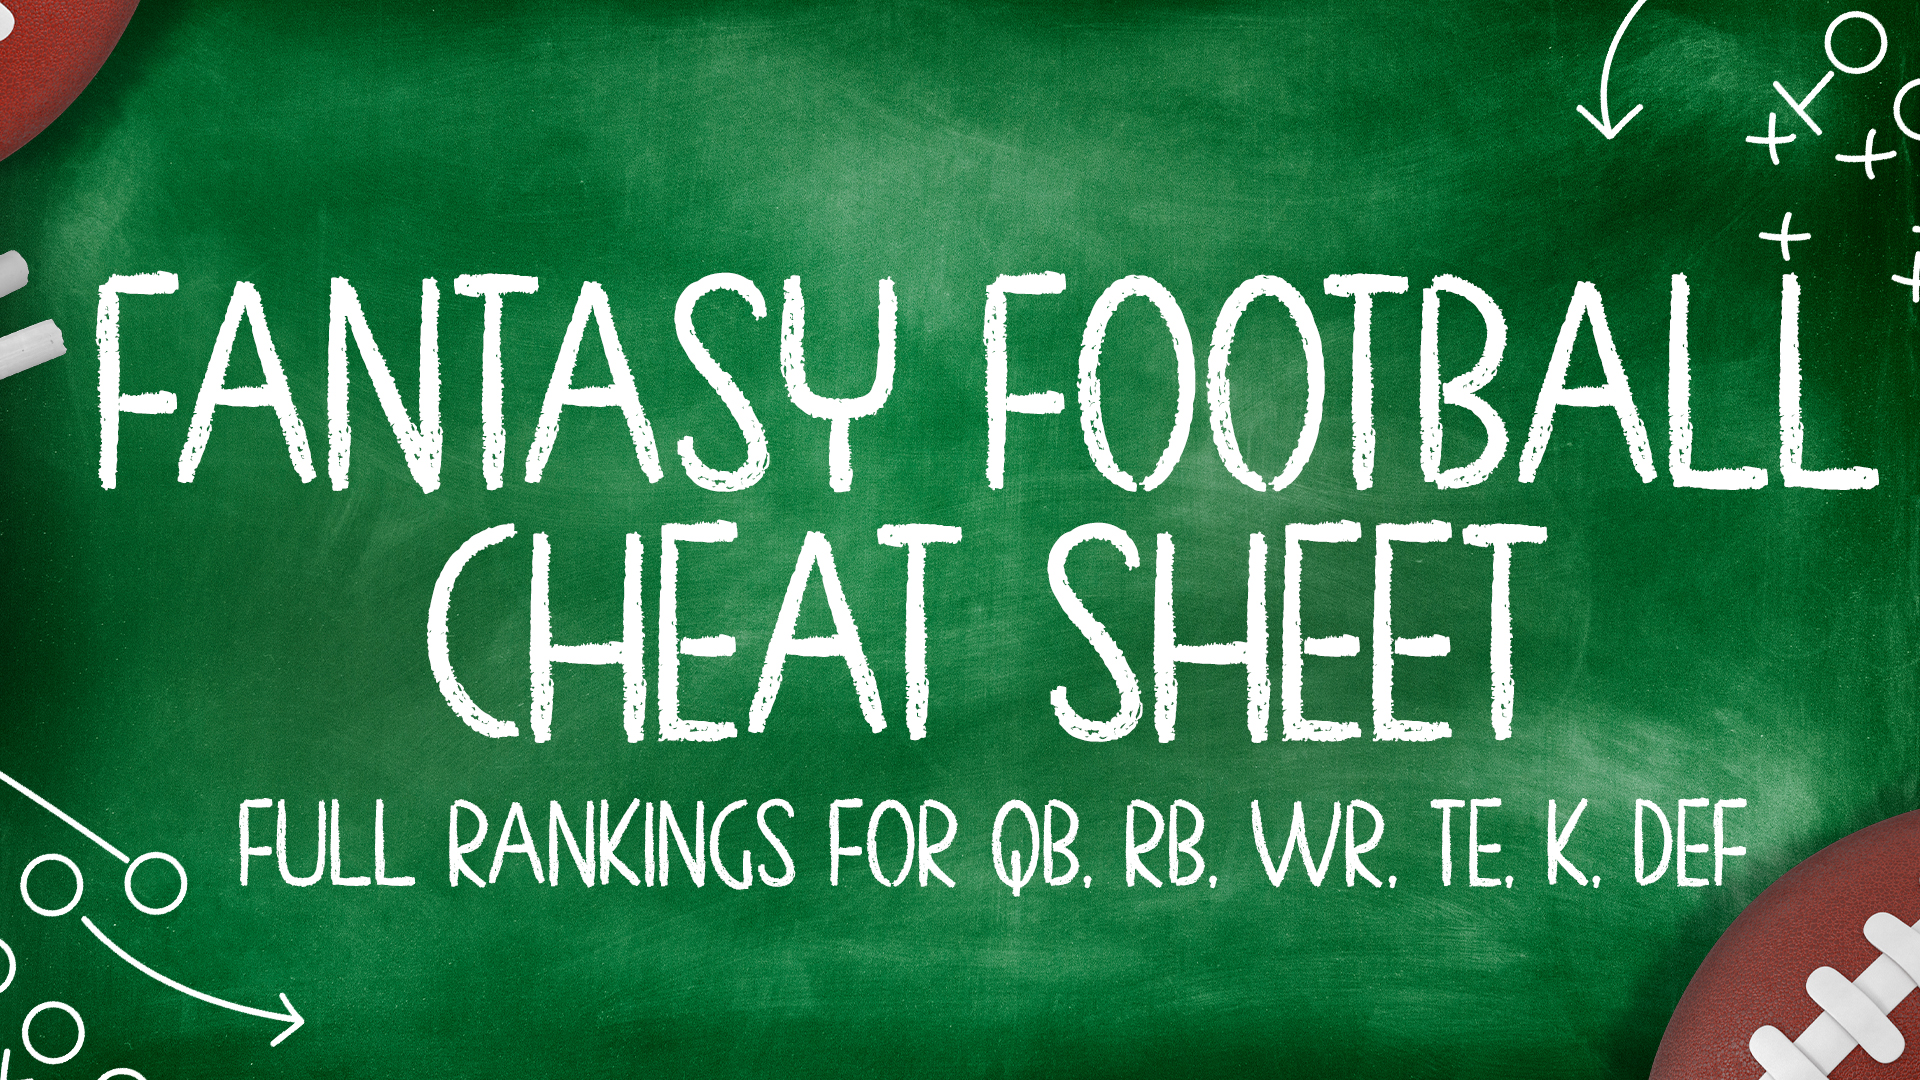 nfl fantasy football printable cheat sheet by position